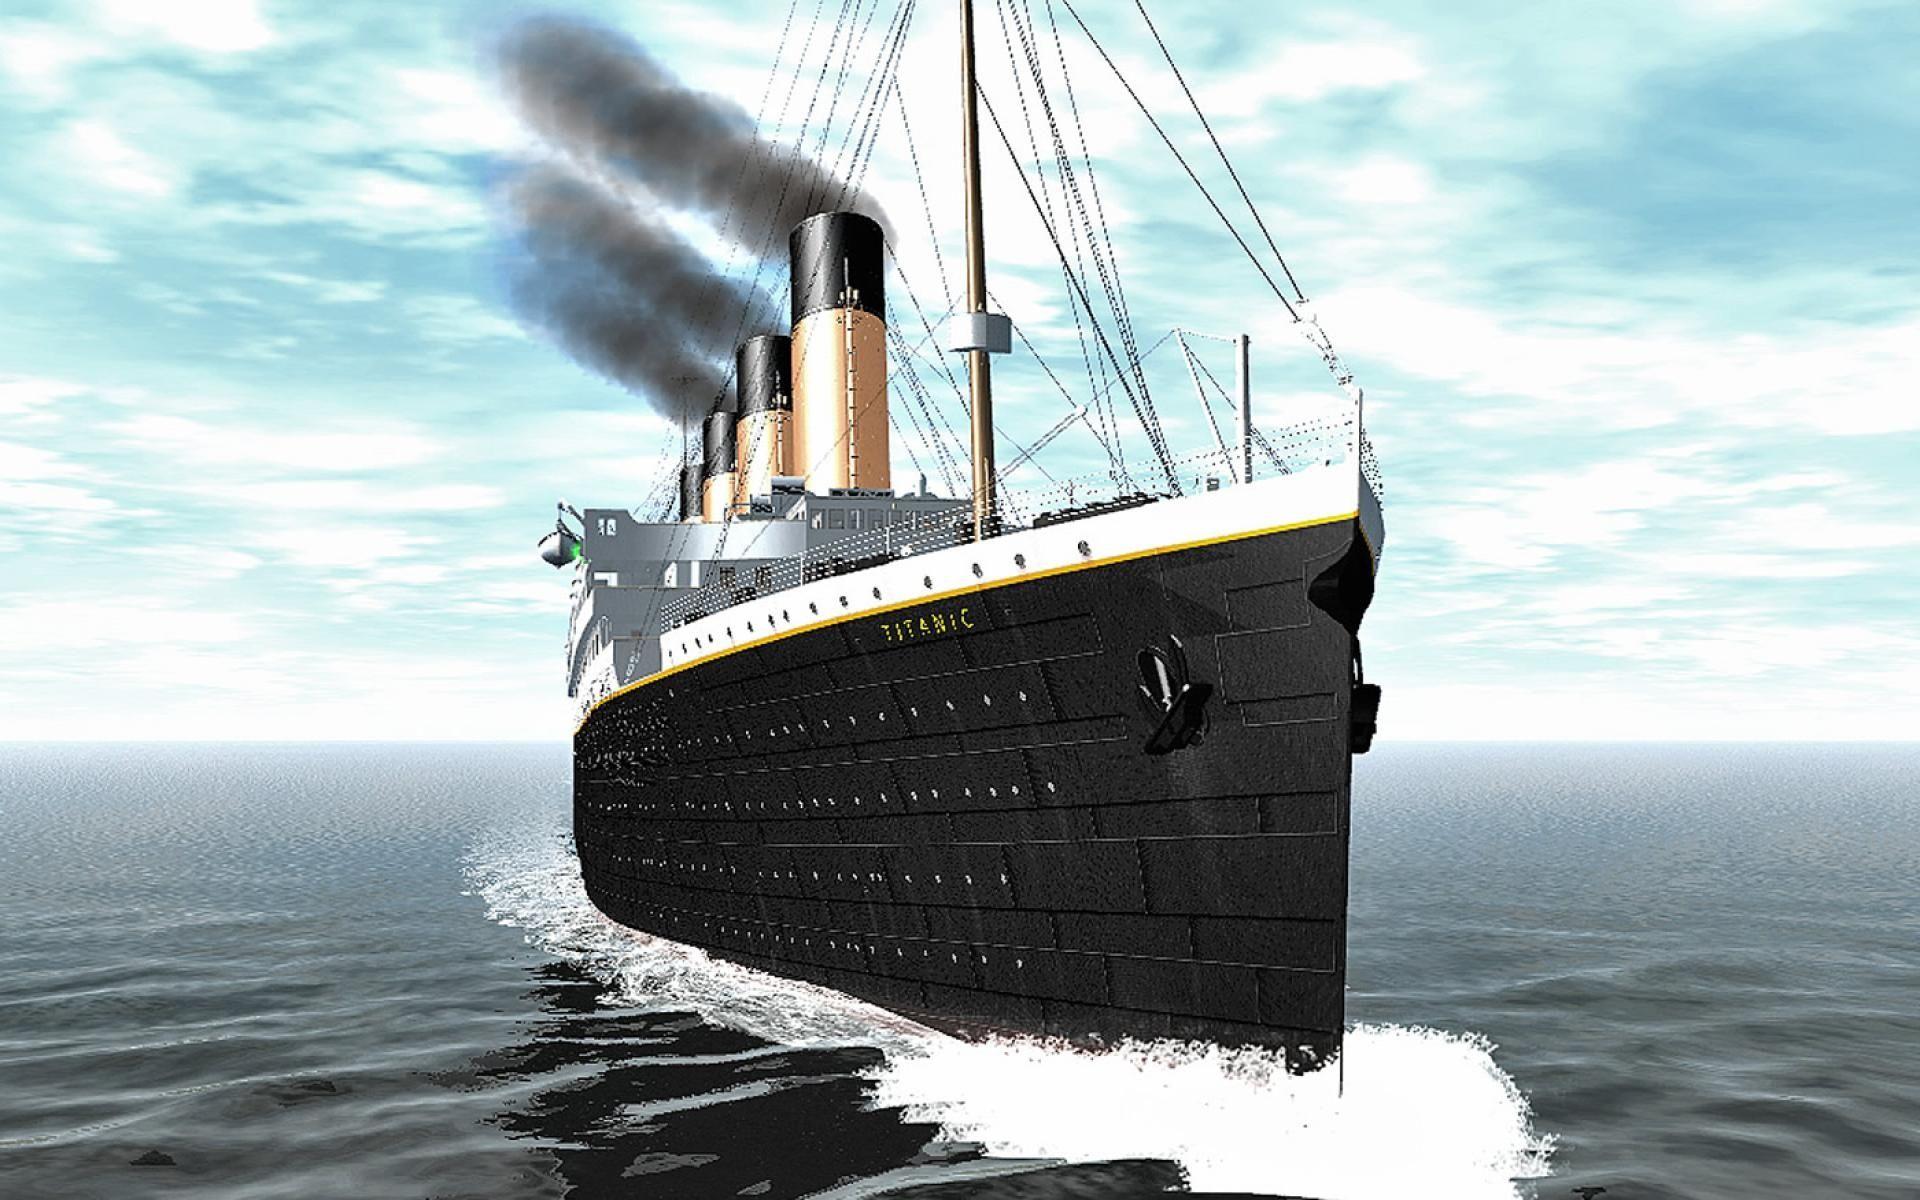 The bow of the Titanic wallpaper and image, picture